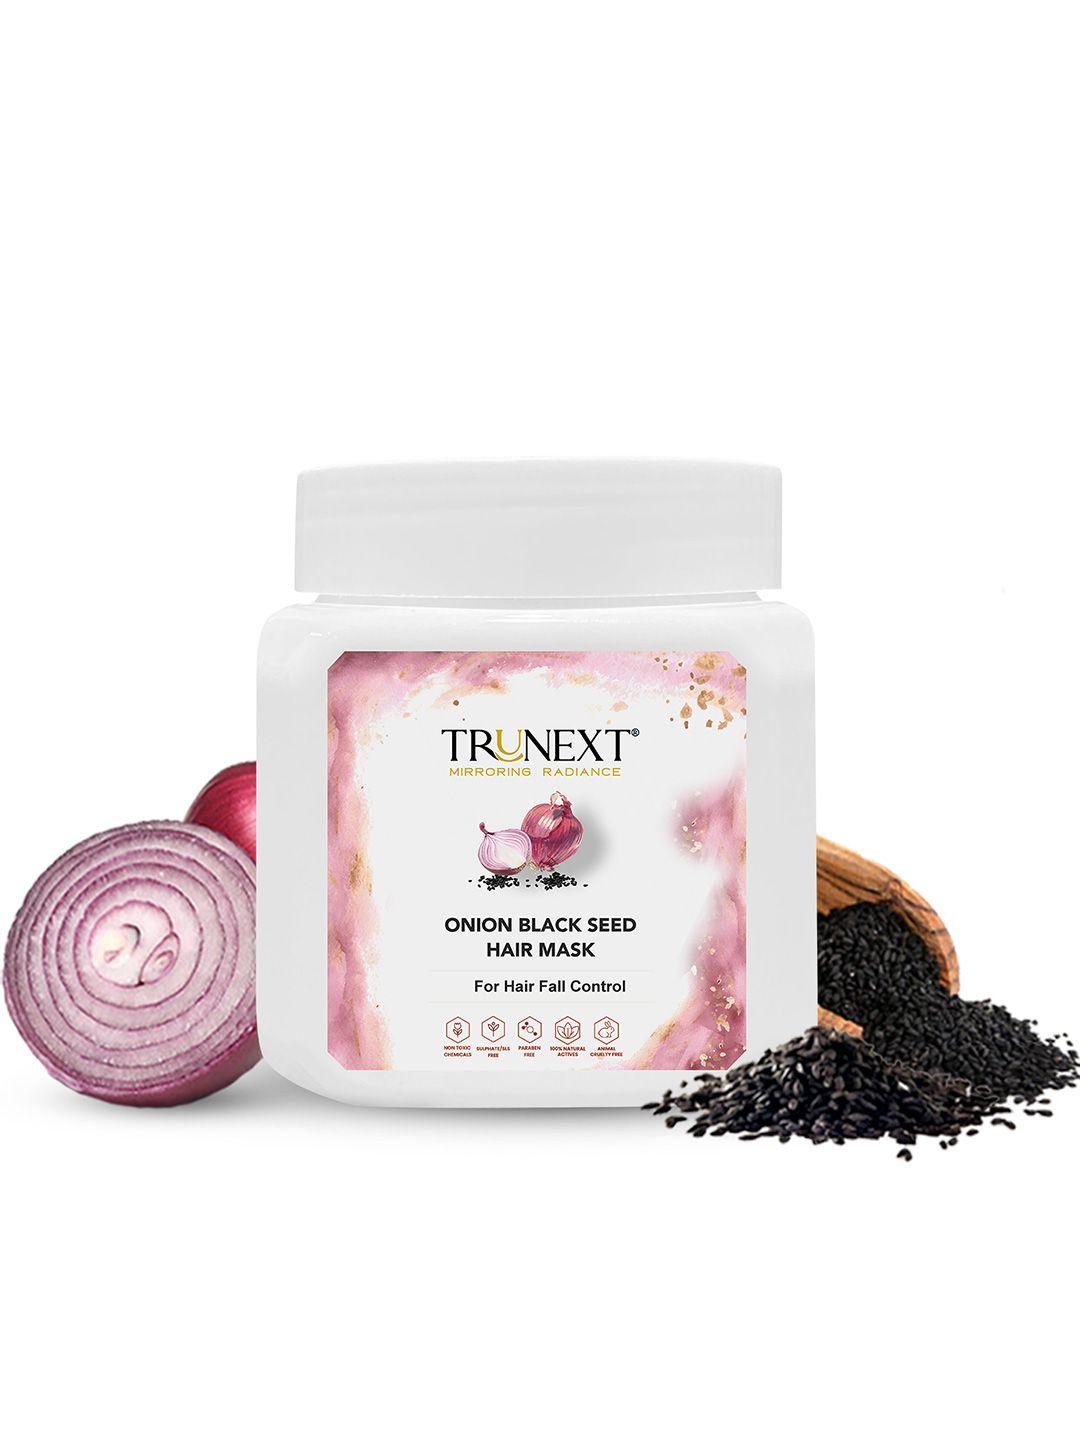 trunext onion black seed hair mask for hair fall control - 200ml